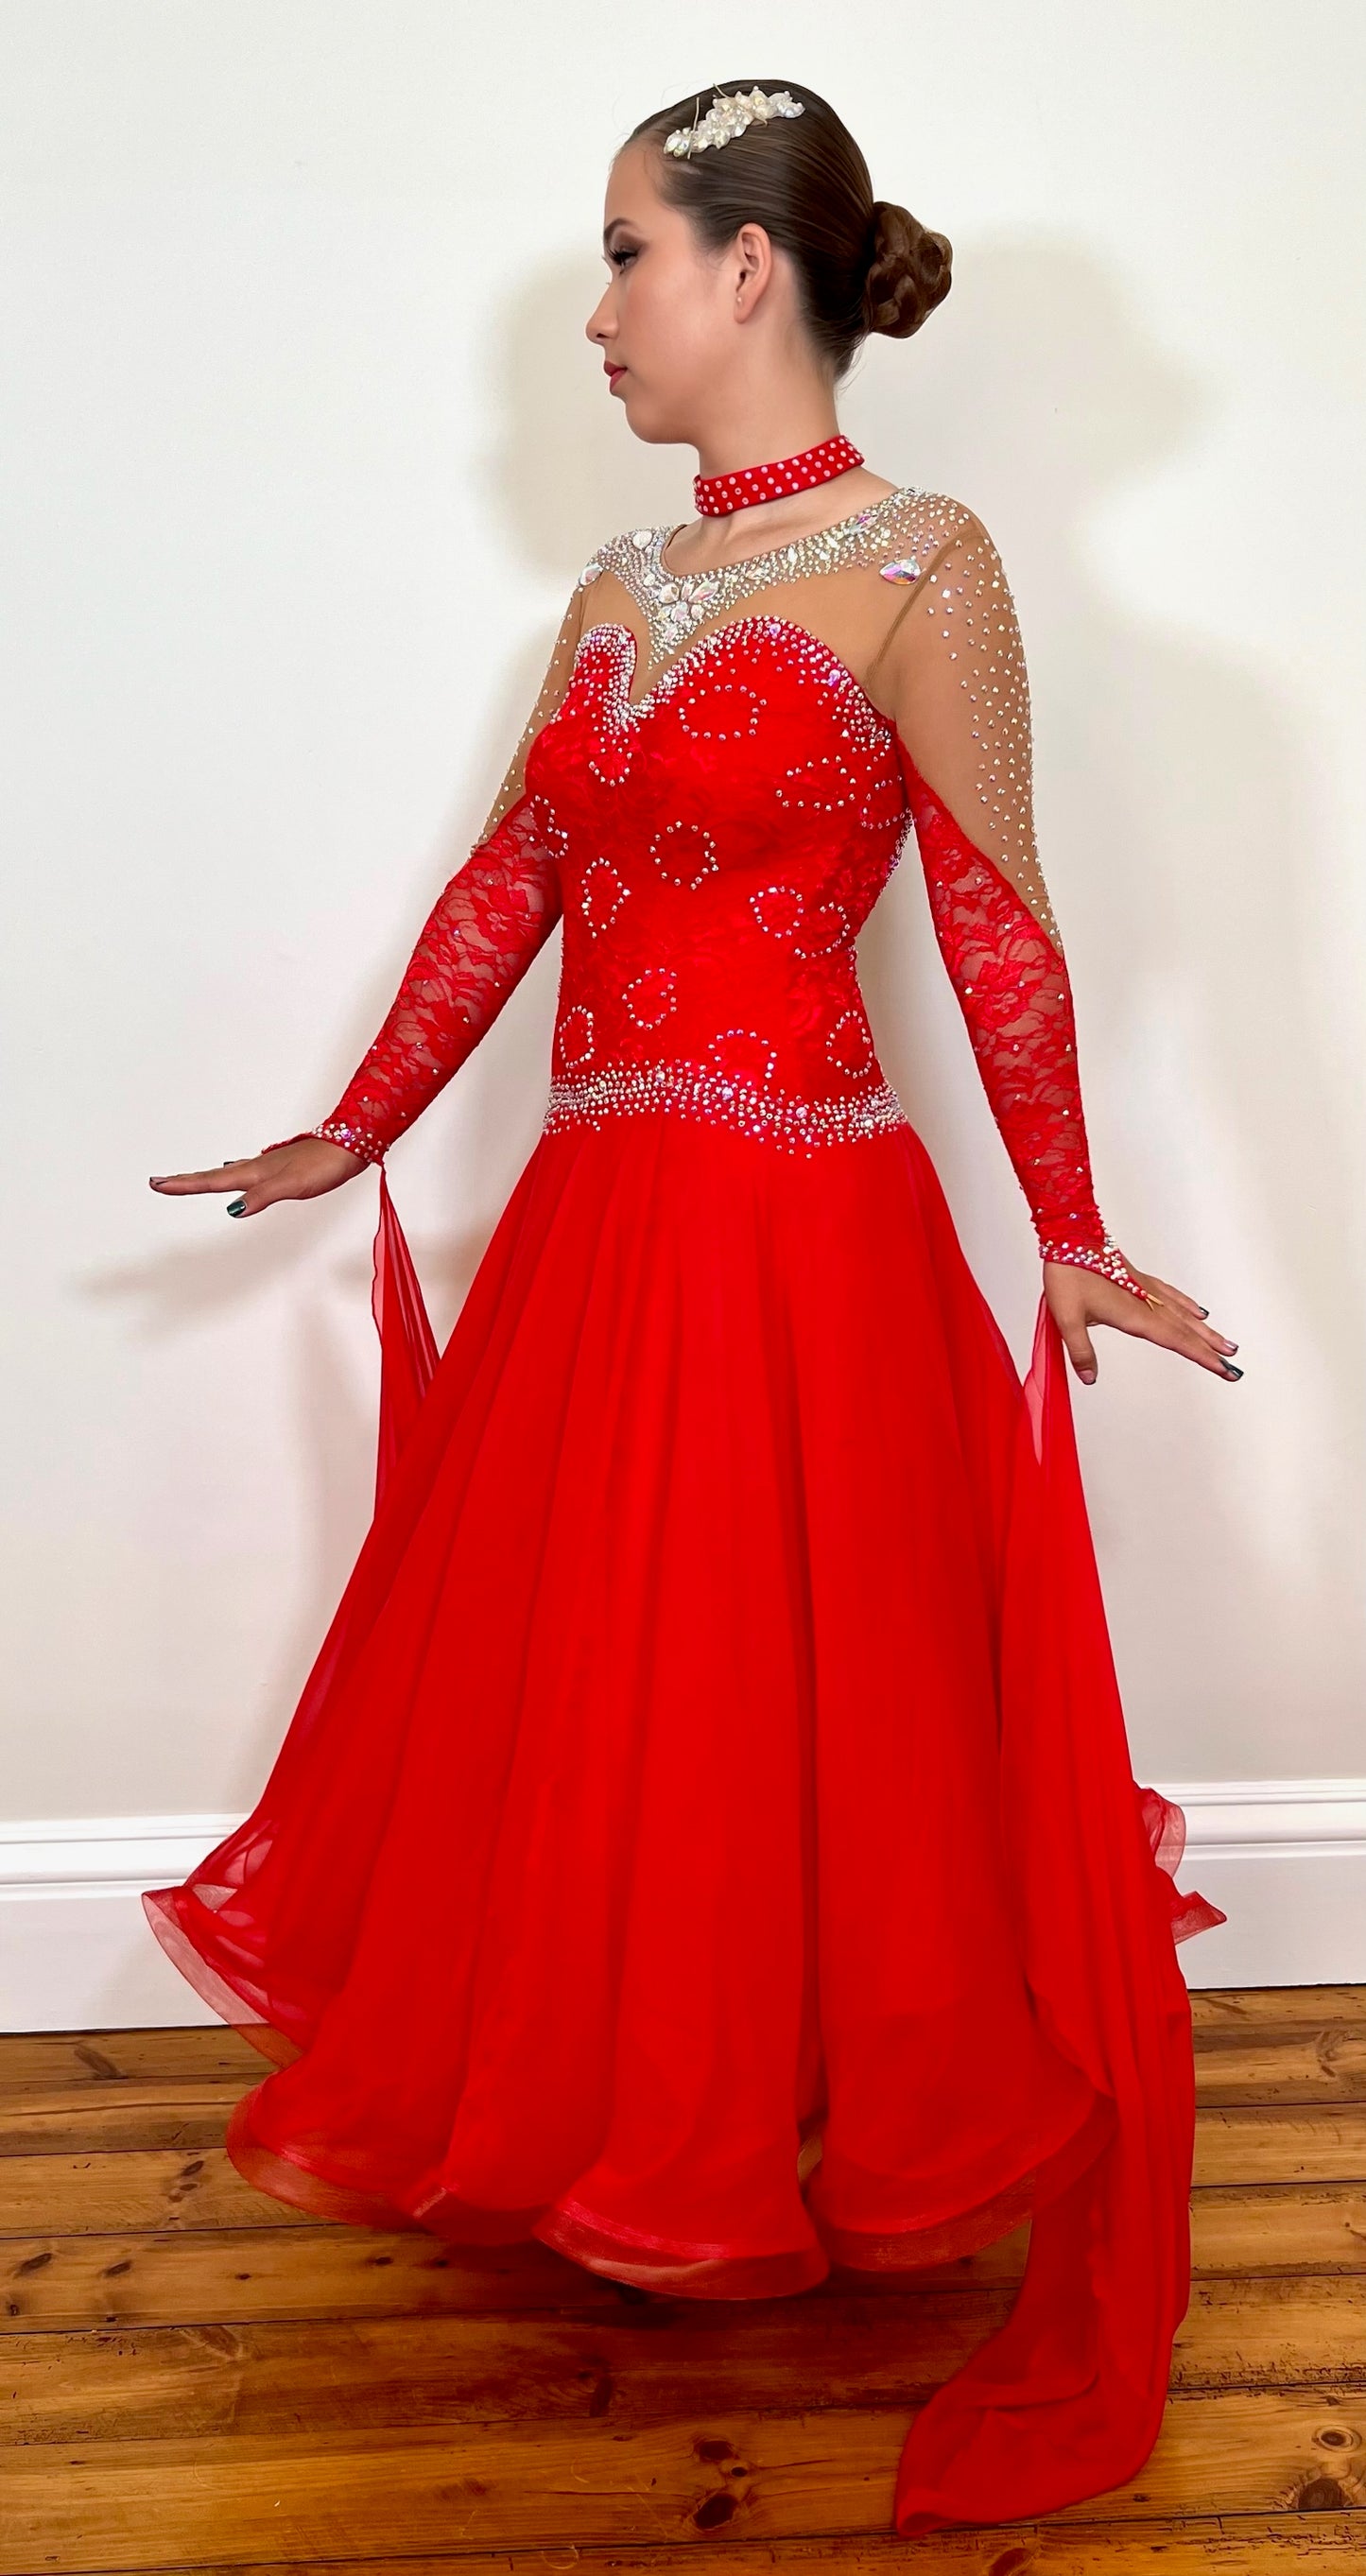 245 Red Ballroom Dress. Decorated in AB stones with bodice chest detail.